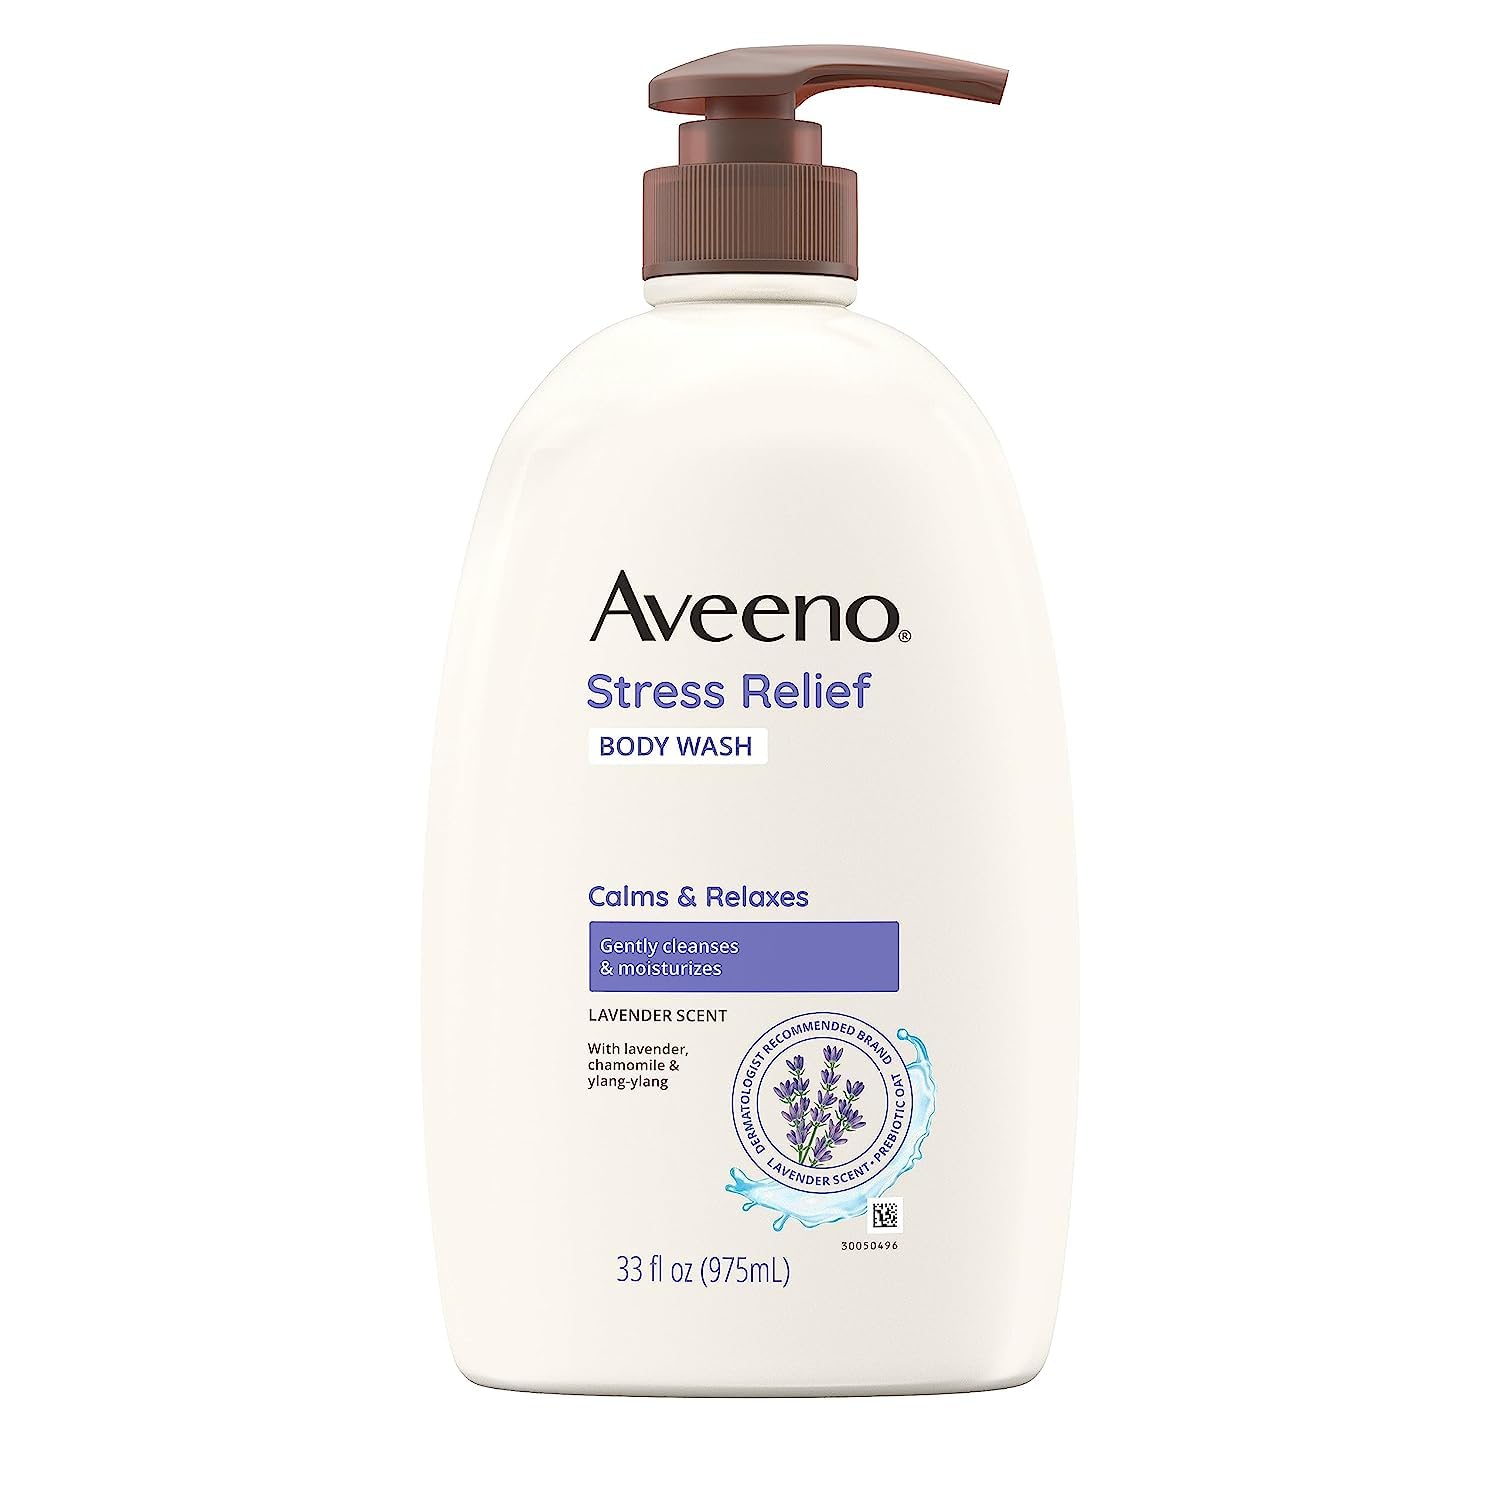 Aveeno Stress Relief Body Wash with Soothing Oat Lavender Chamomile & Ylang-Ylang Essential Oils Hypoallergenic Dye-Free & Soap-Free Calming Body Wash gentle on Sensitive Skin 33 fl. oz(Pack of 1)